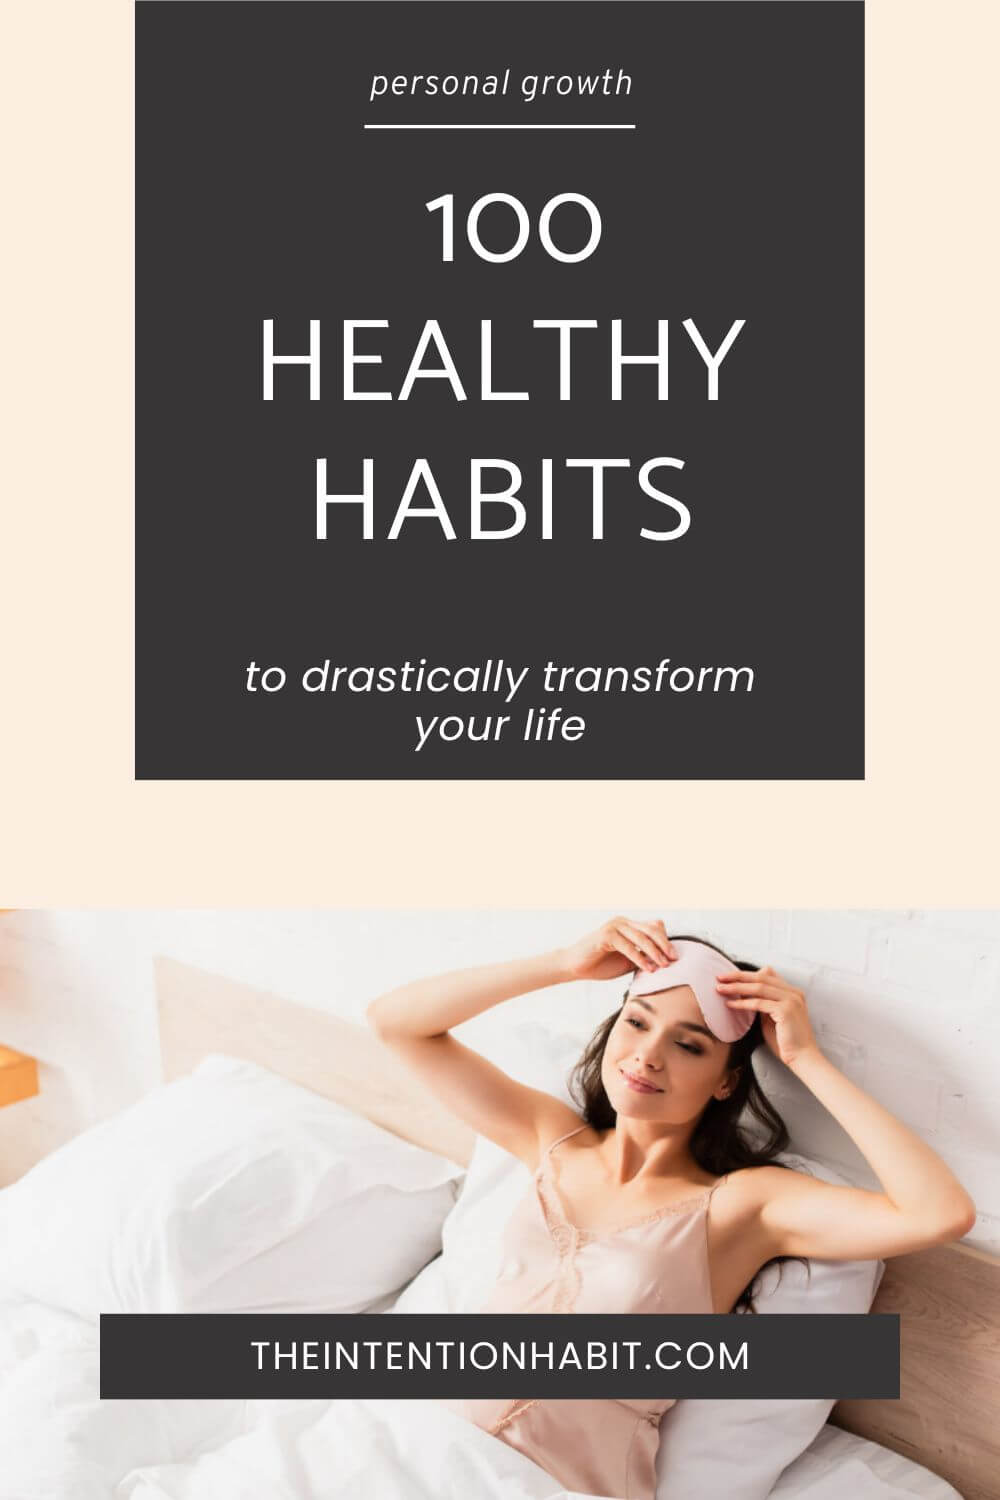 100 healthy habits to drastically transform your life.